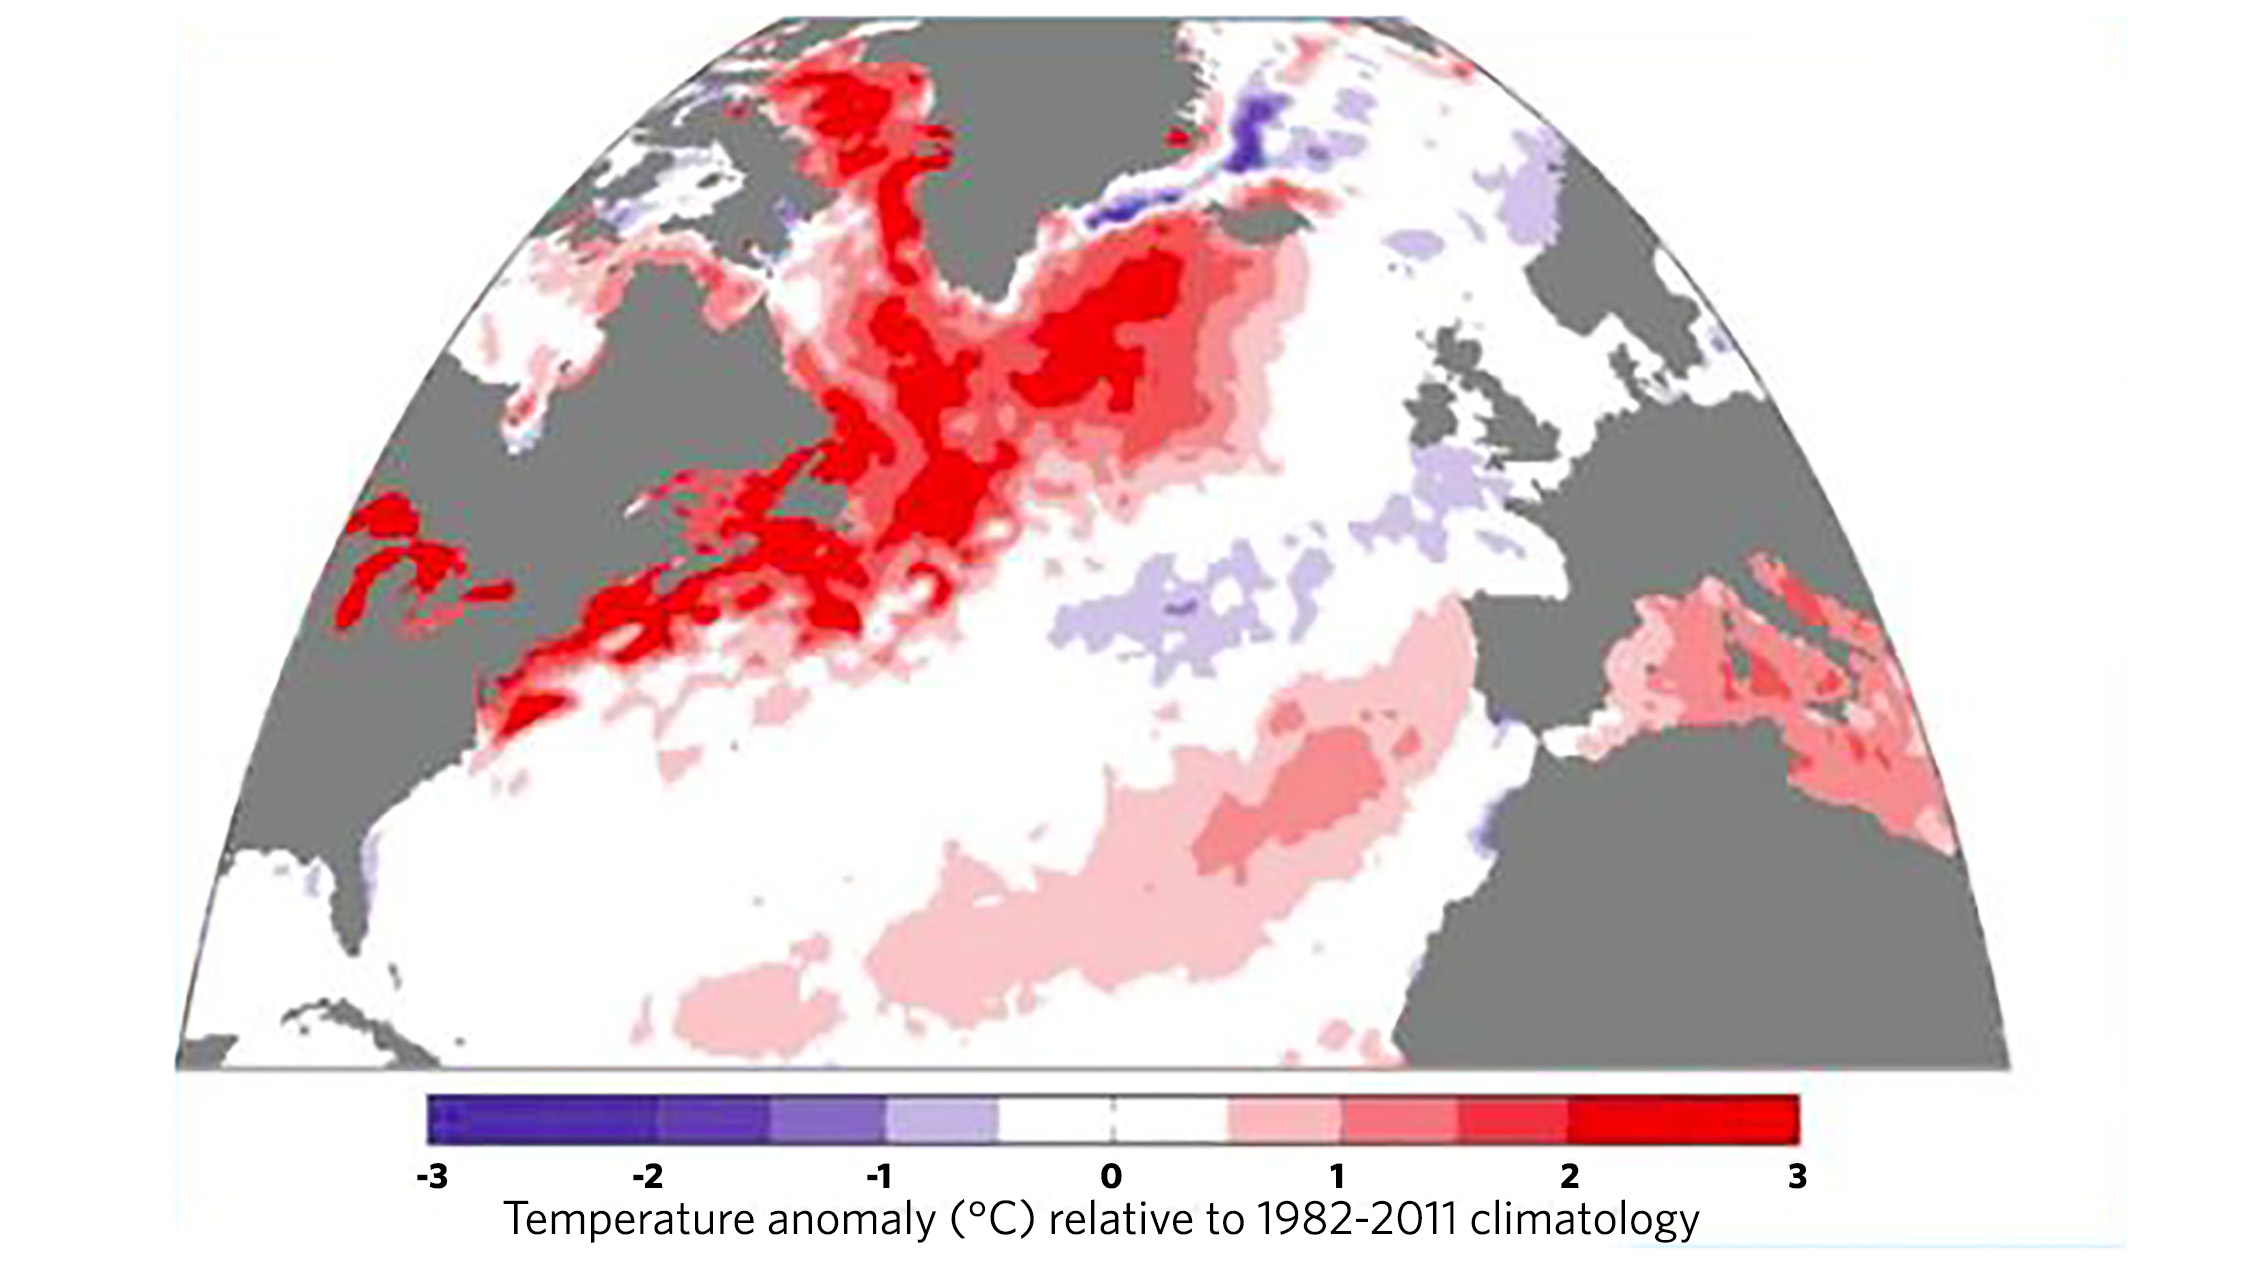 A map of sea temperatures during the “ocean heat wave” of 2012, when warm waters disrupted the food web and puffin chicks starved.